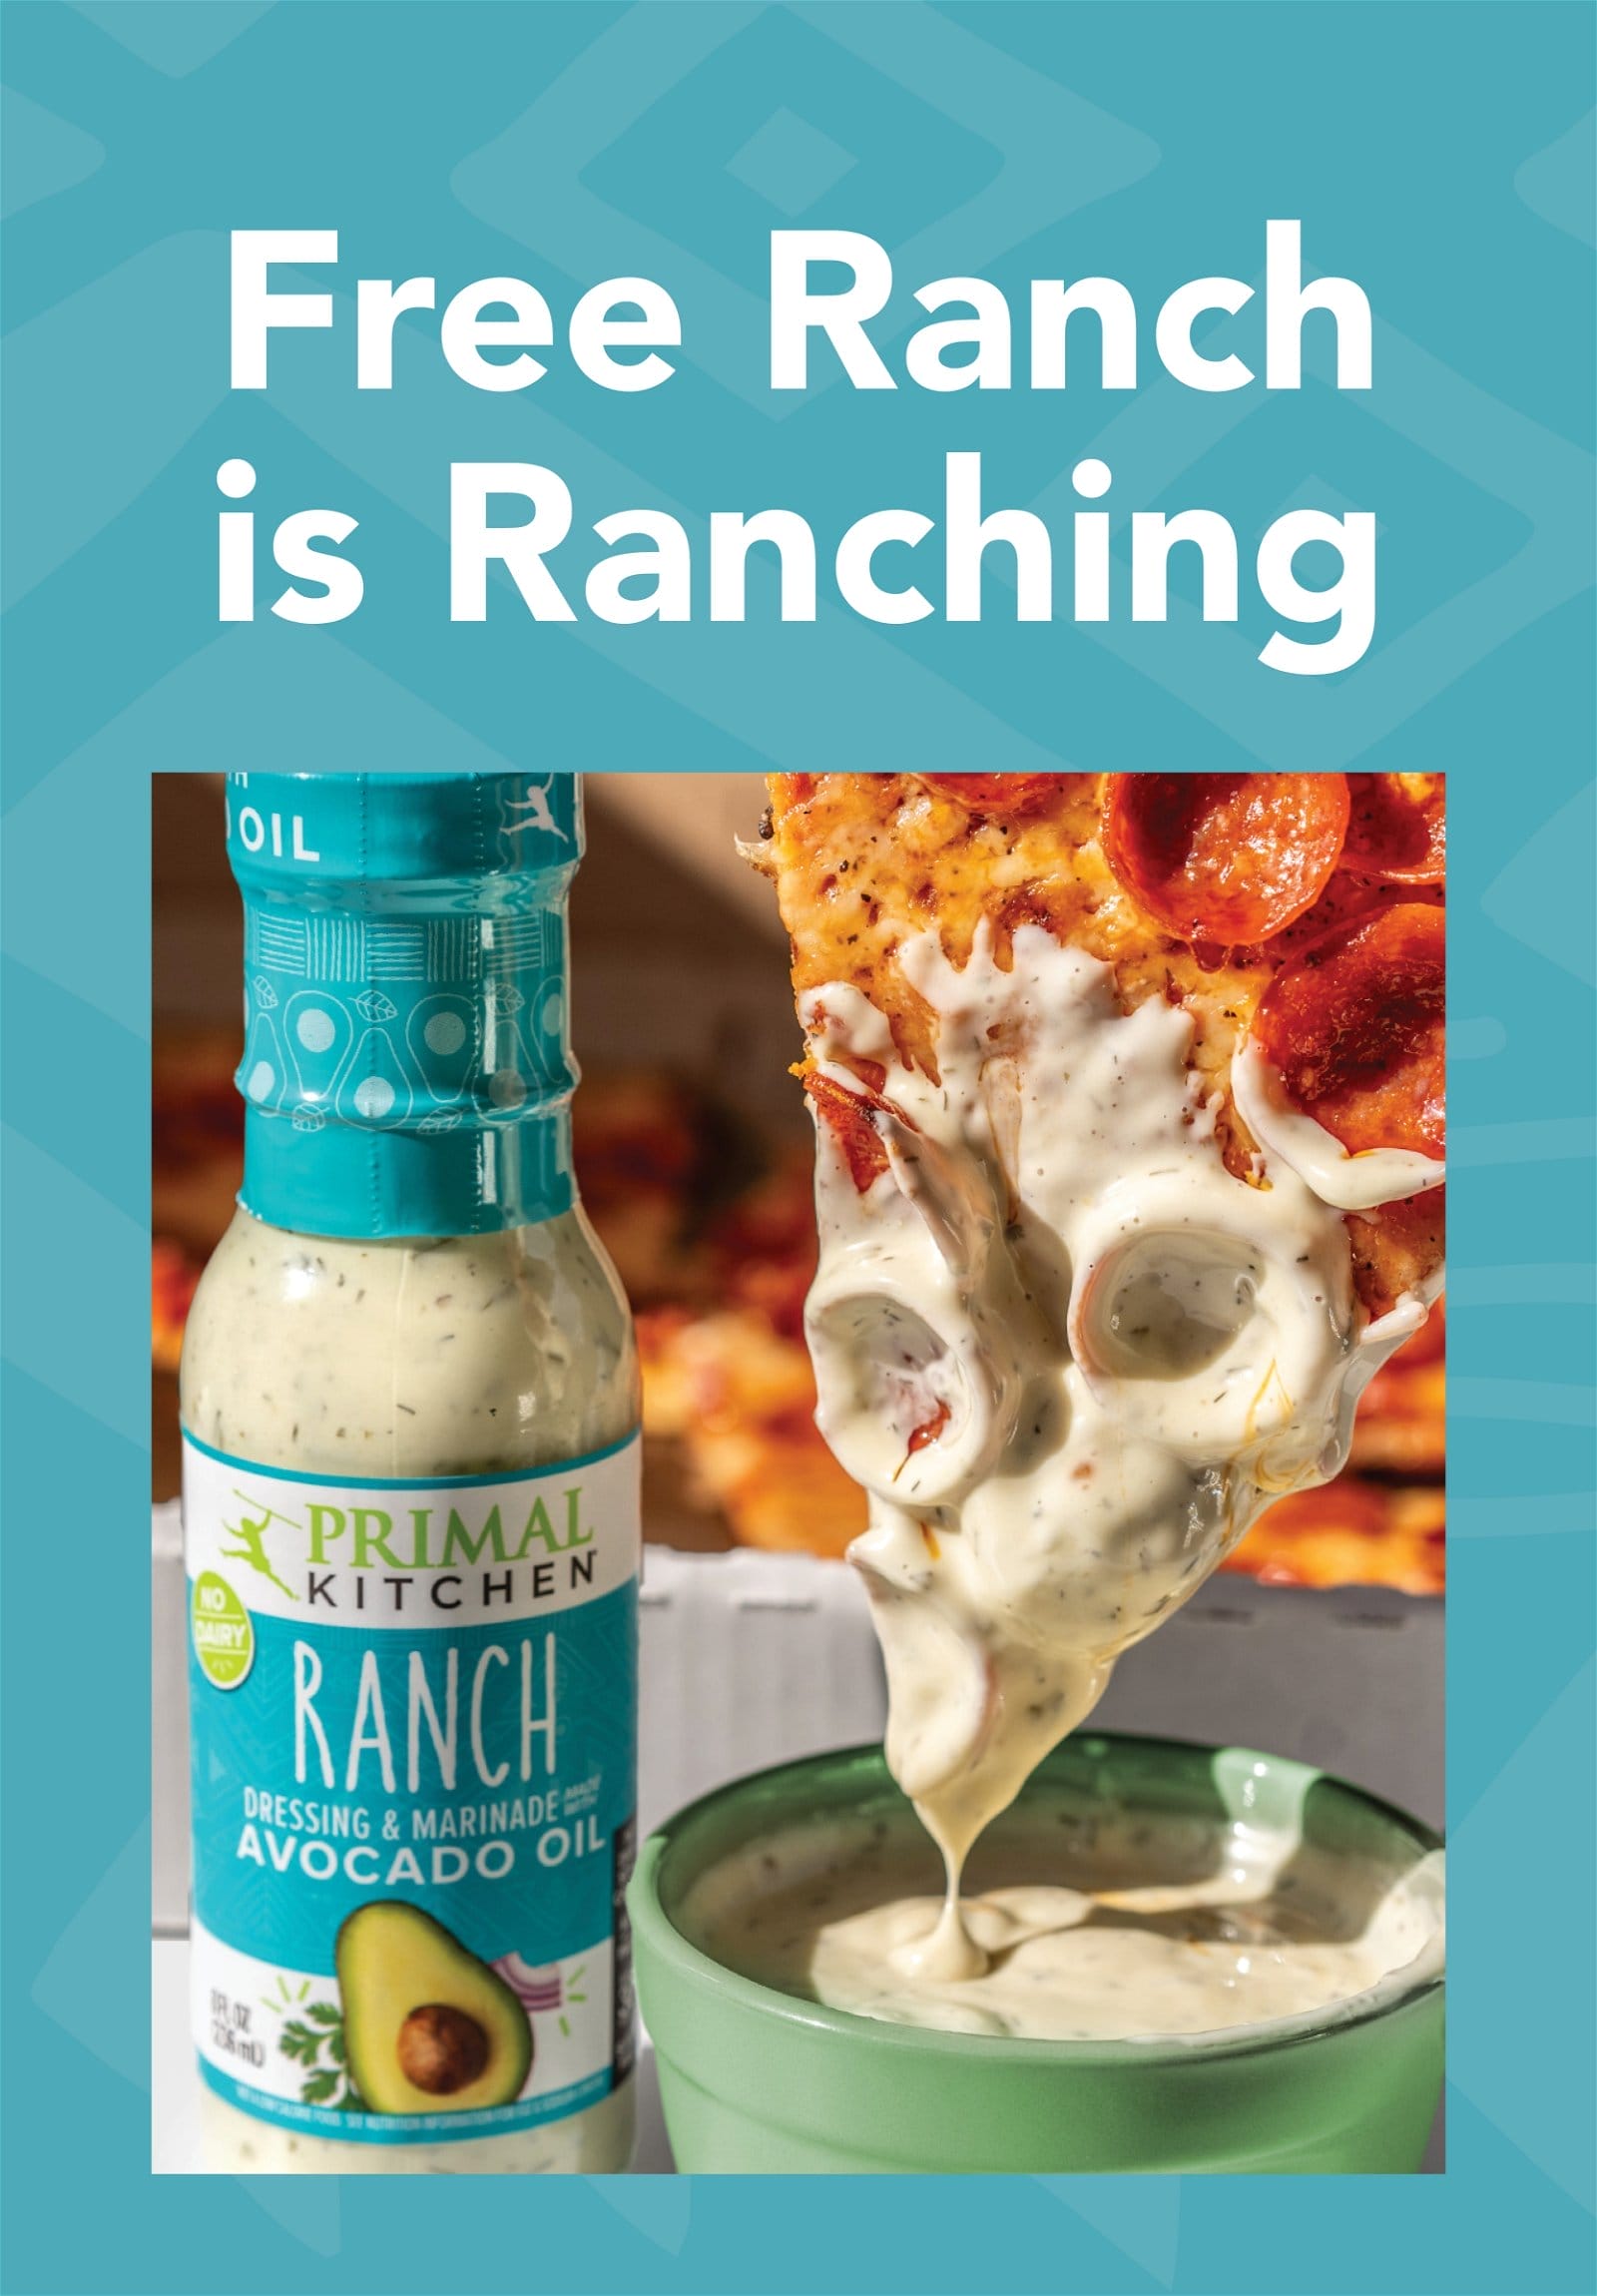 "Free Ranch is Ranching" with slice of pizza being dunked in Primal Kitchen Ranch Dressing